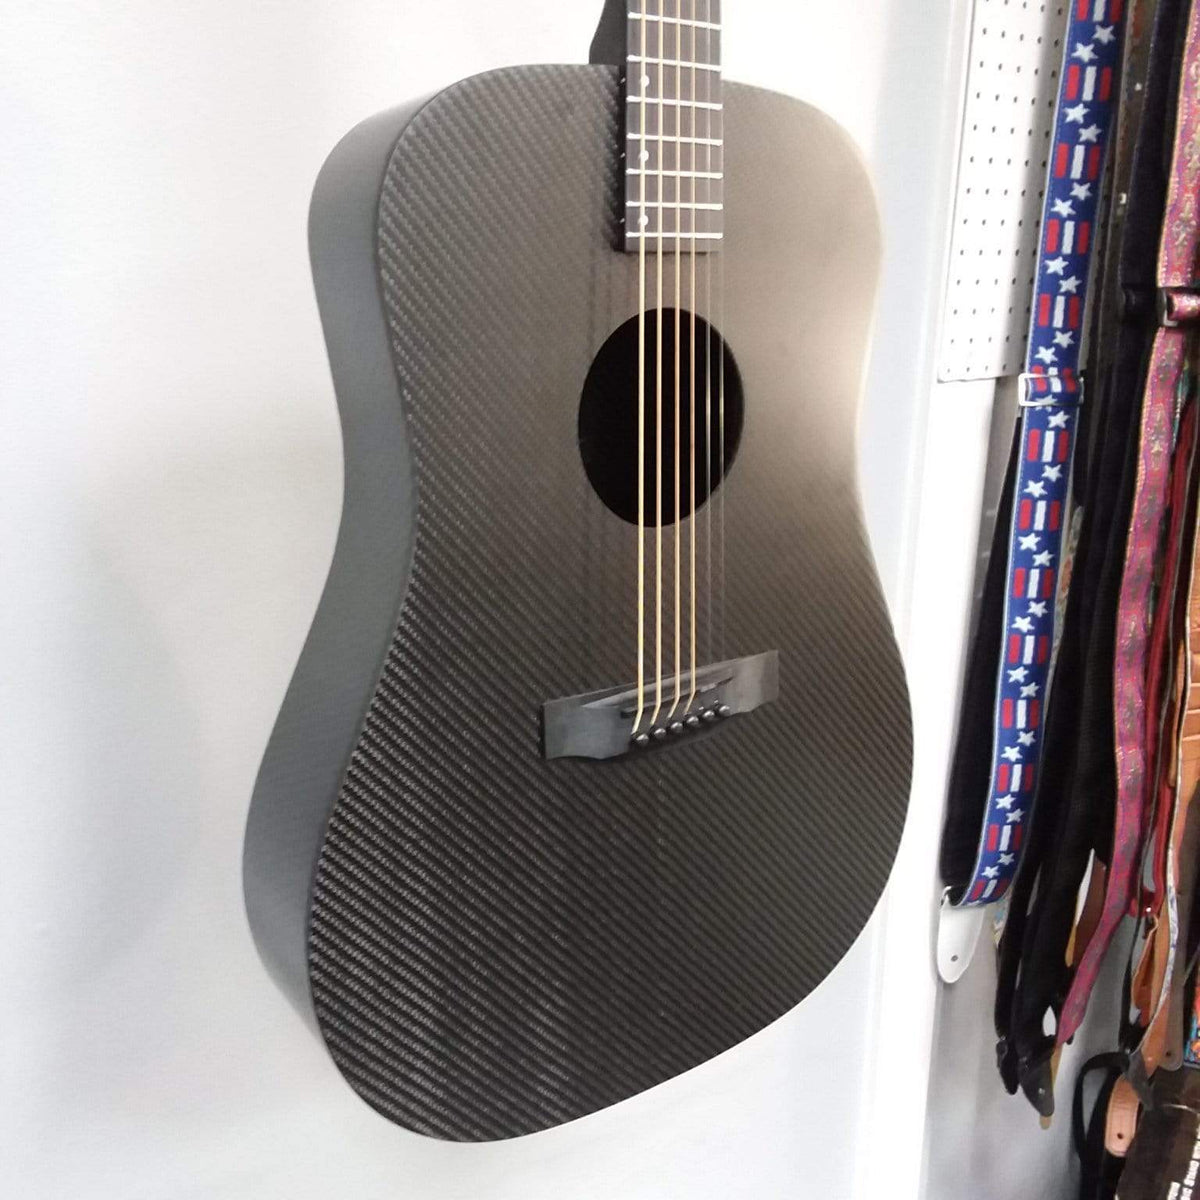 Klos Full Carbon Deluxe Acoustic Electric Guitar Guitars...